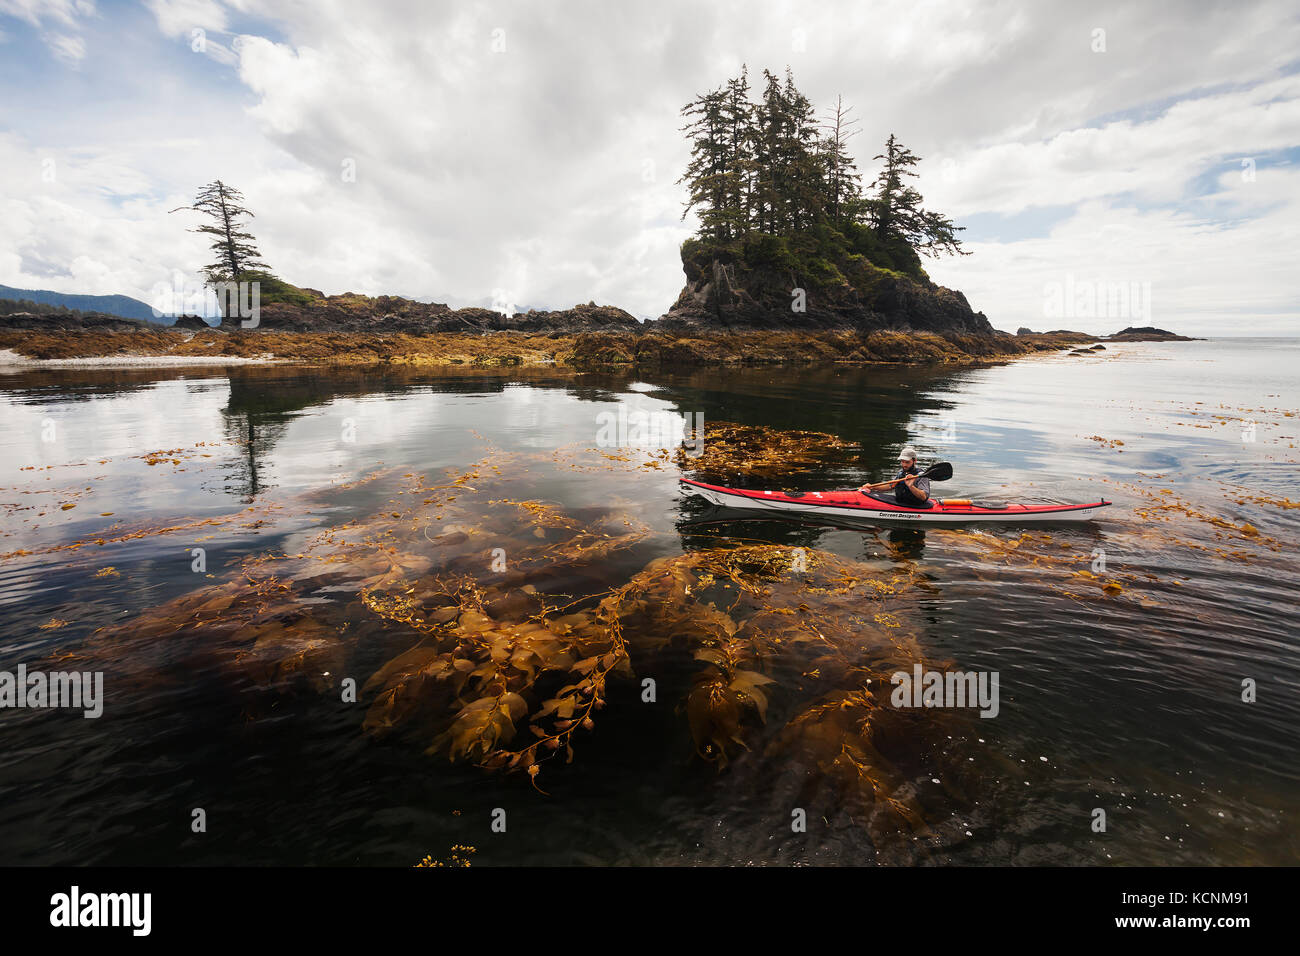 A kayaker paddles through a kelp forest on the eastern side of  Spring Island.  Kyuquot, Vancouver Island, British Columbia, Canada. Stock Photo